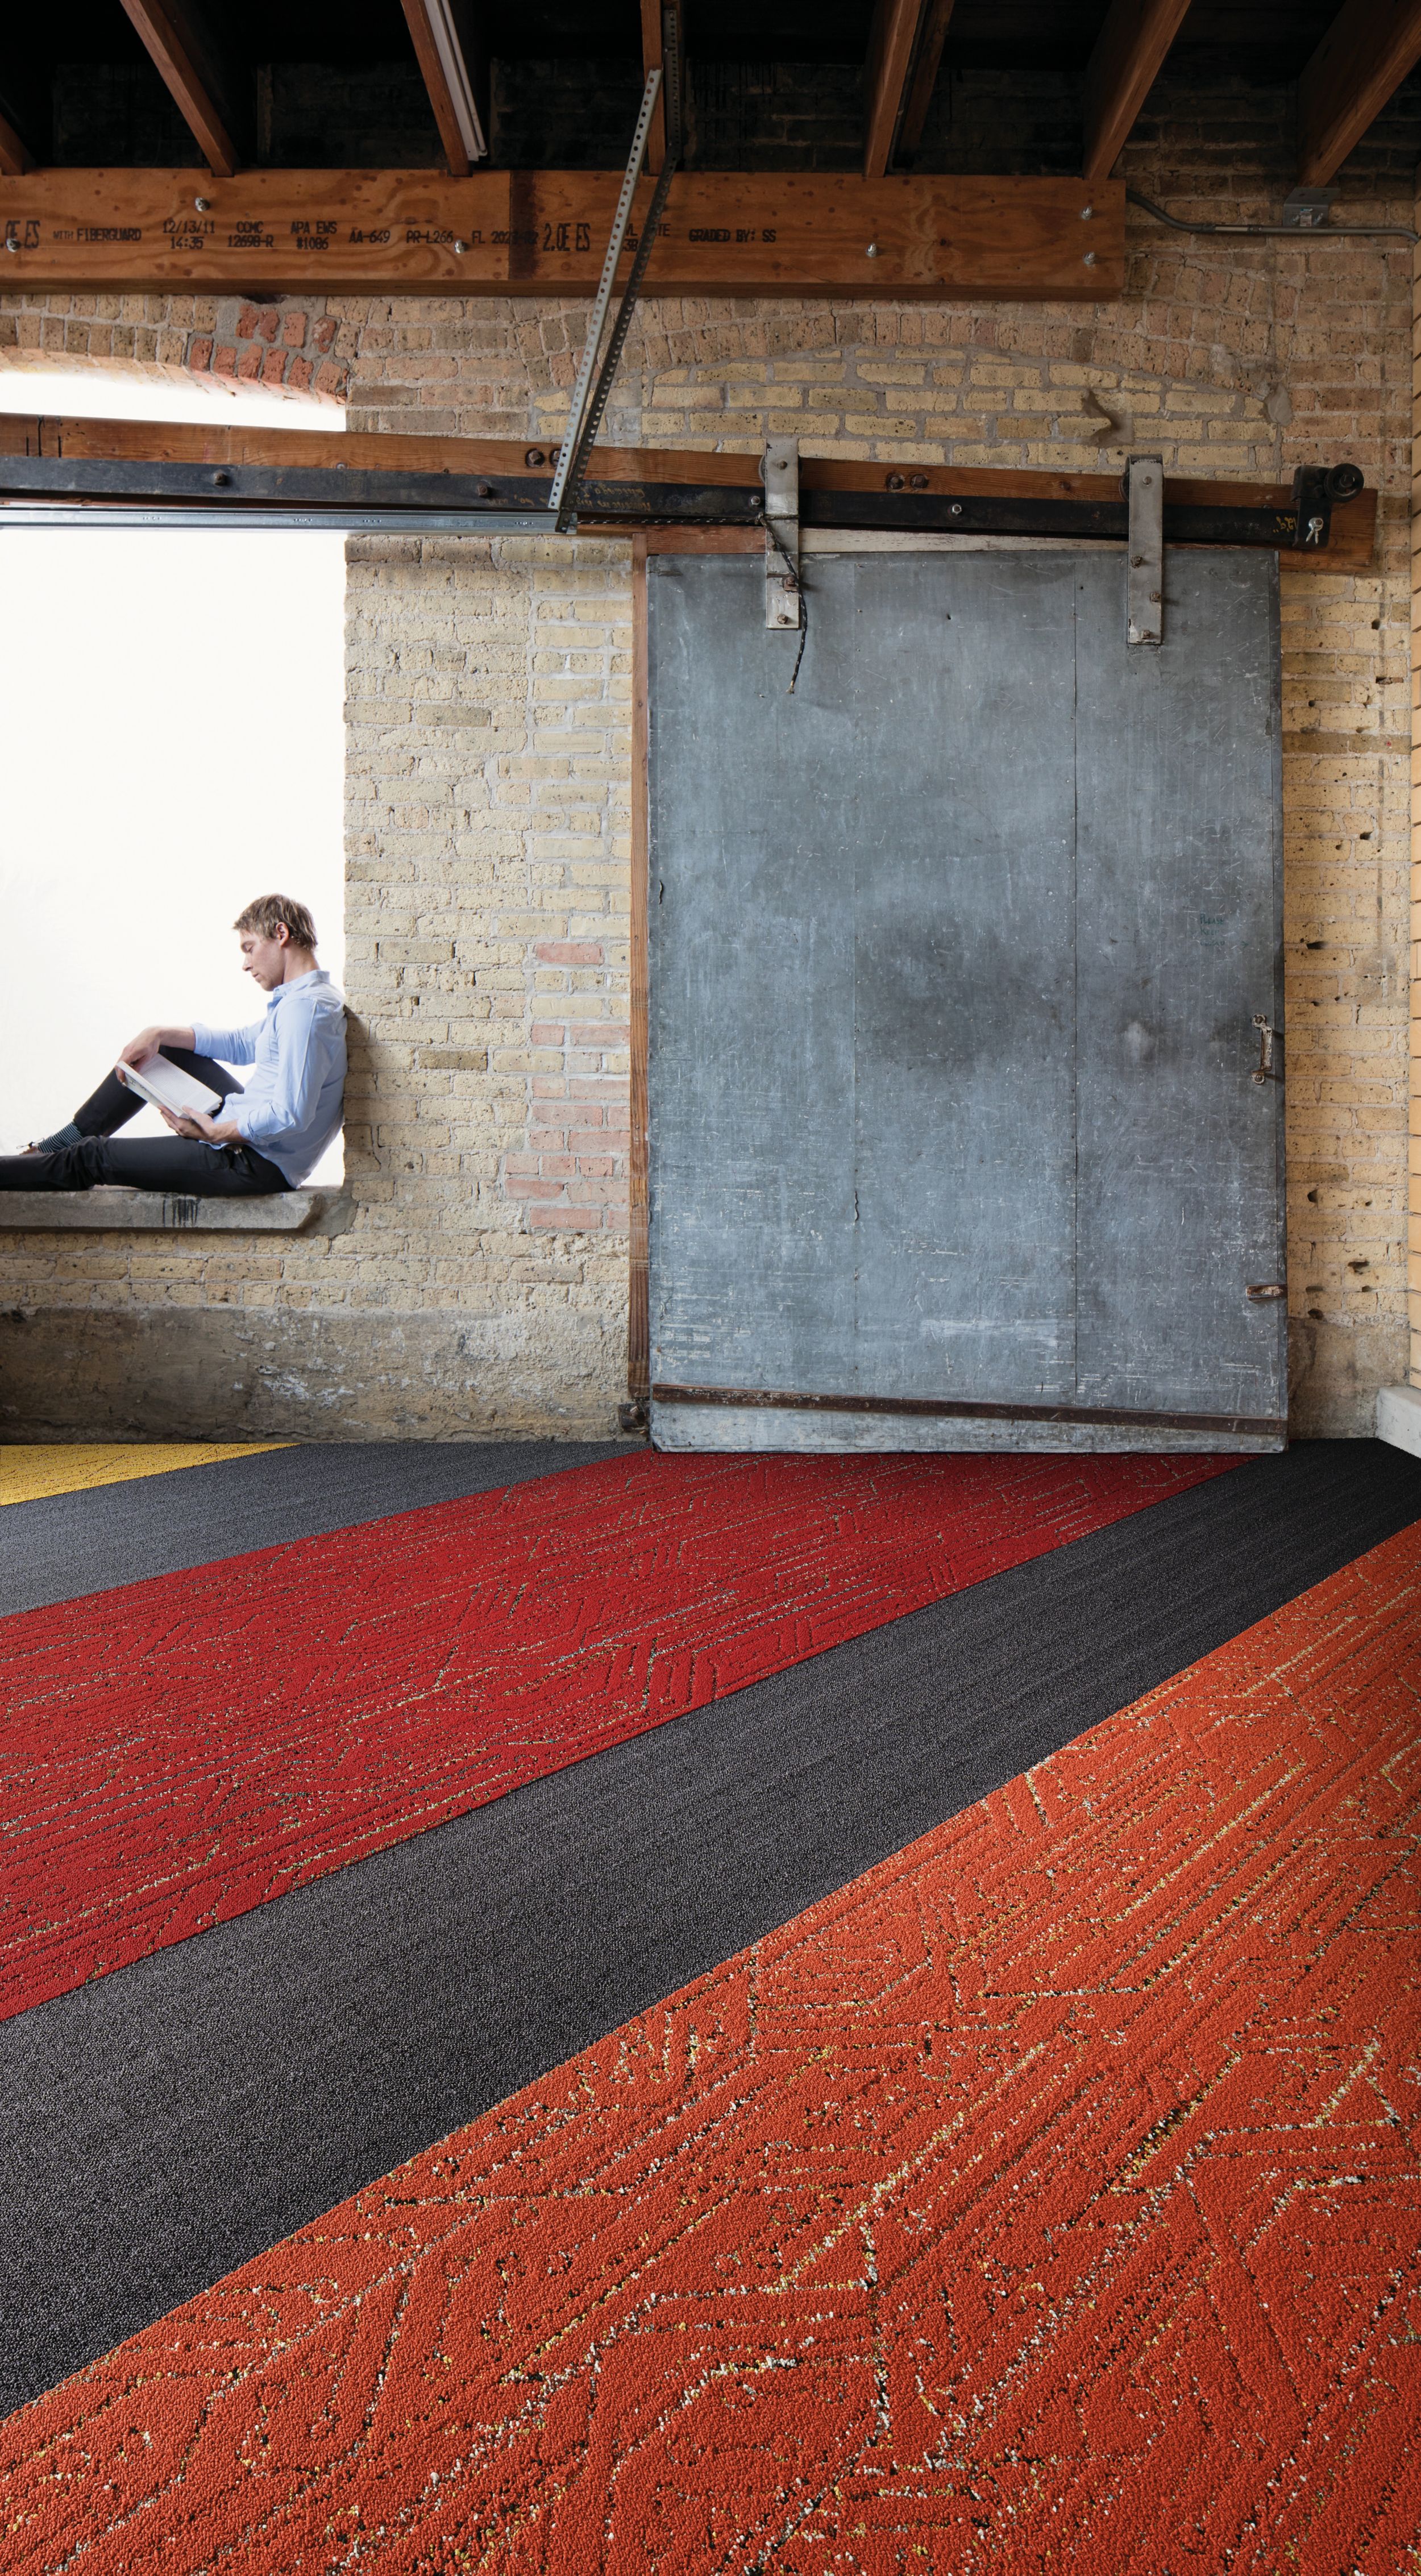 Interface Circuit Board and Plain Stitch plank carpet tile in modern office building with man seated image number 6